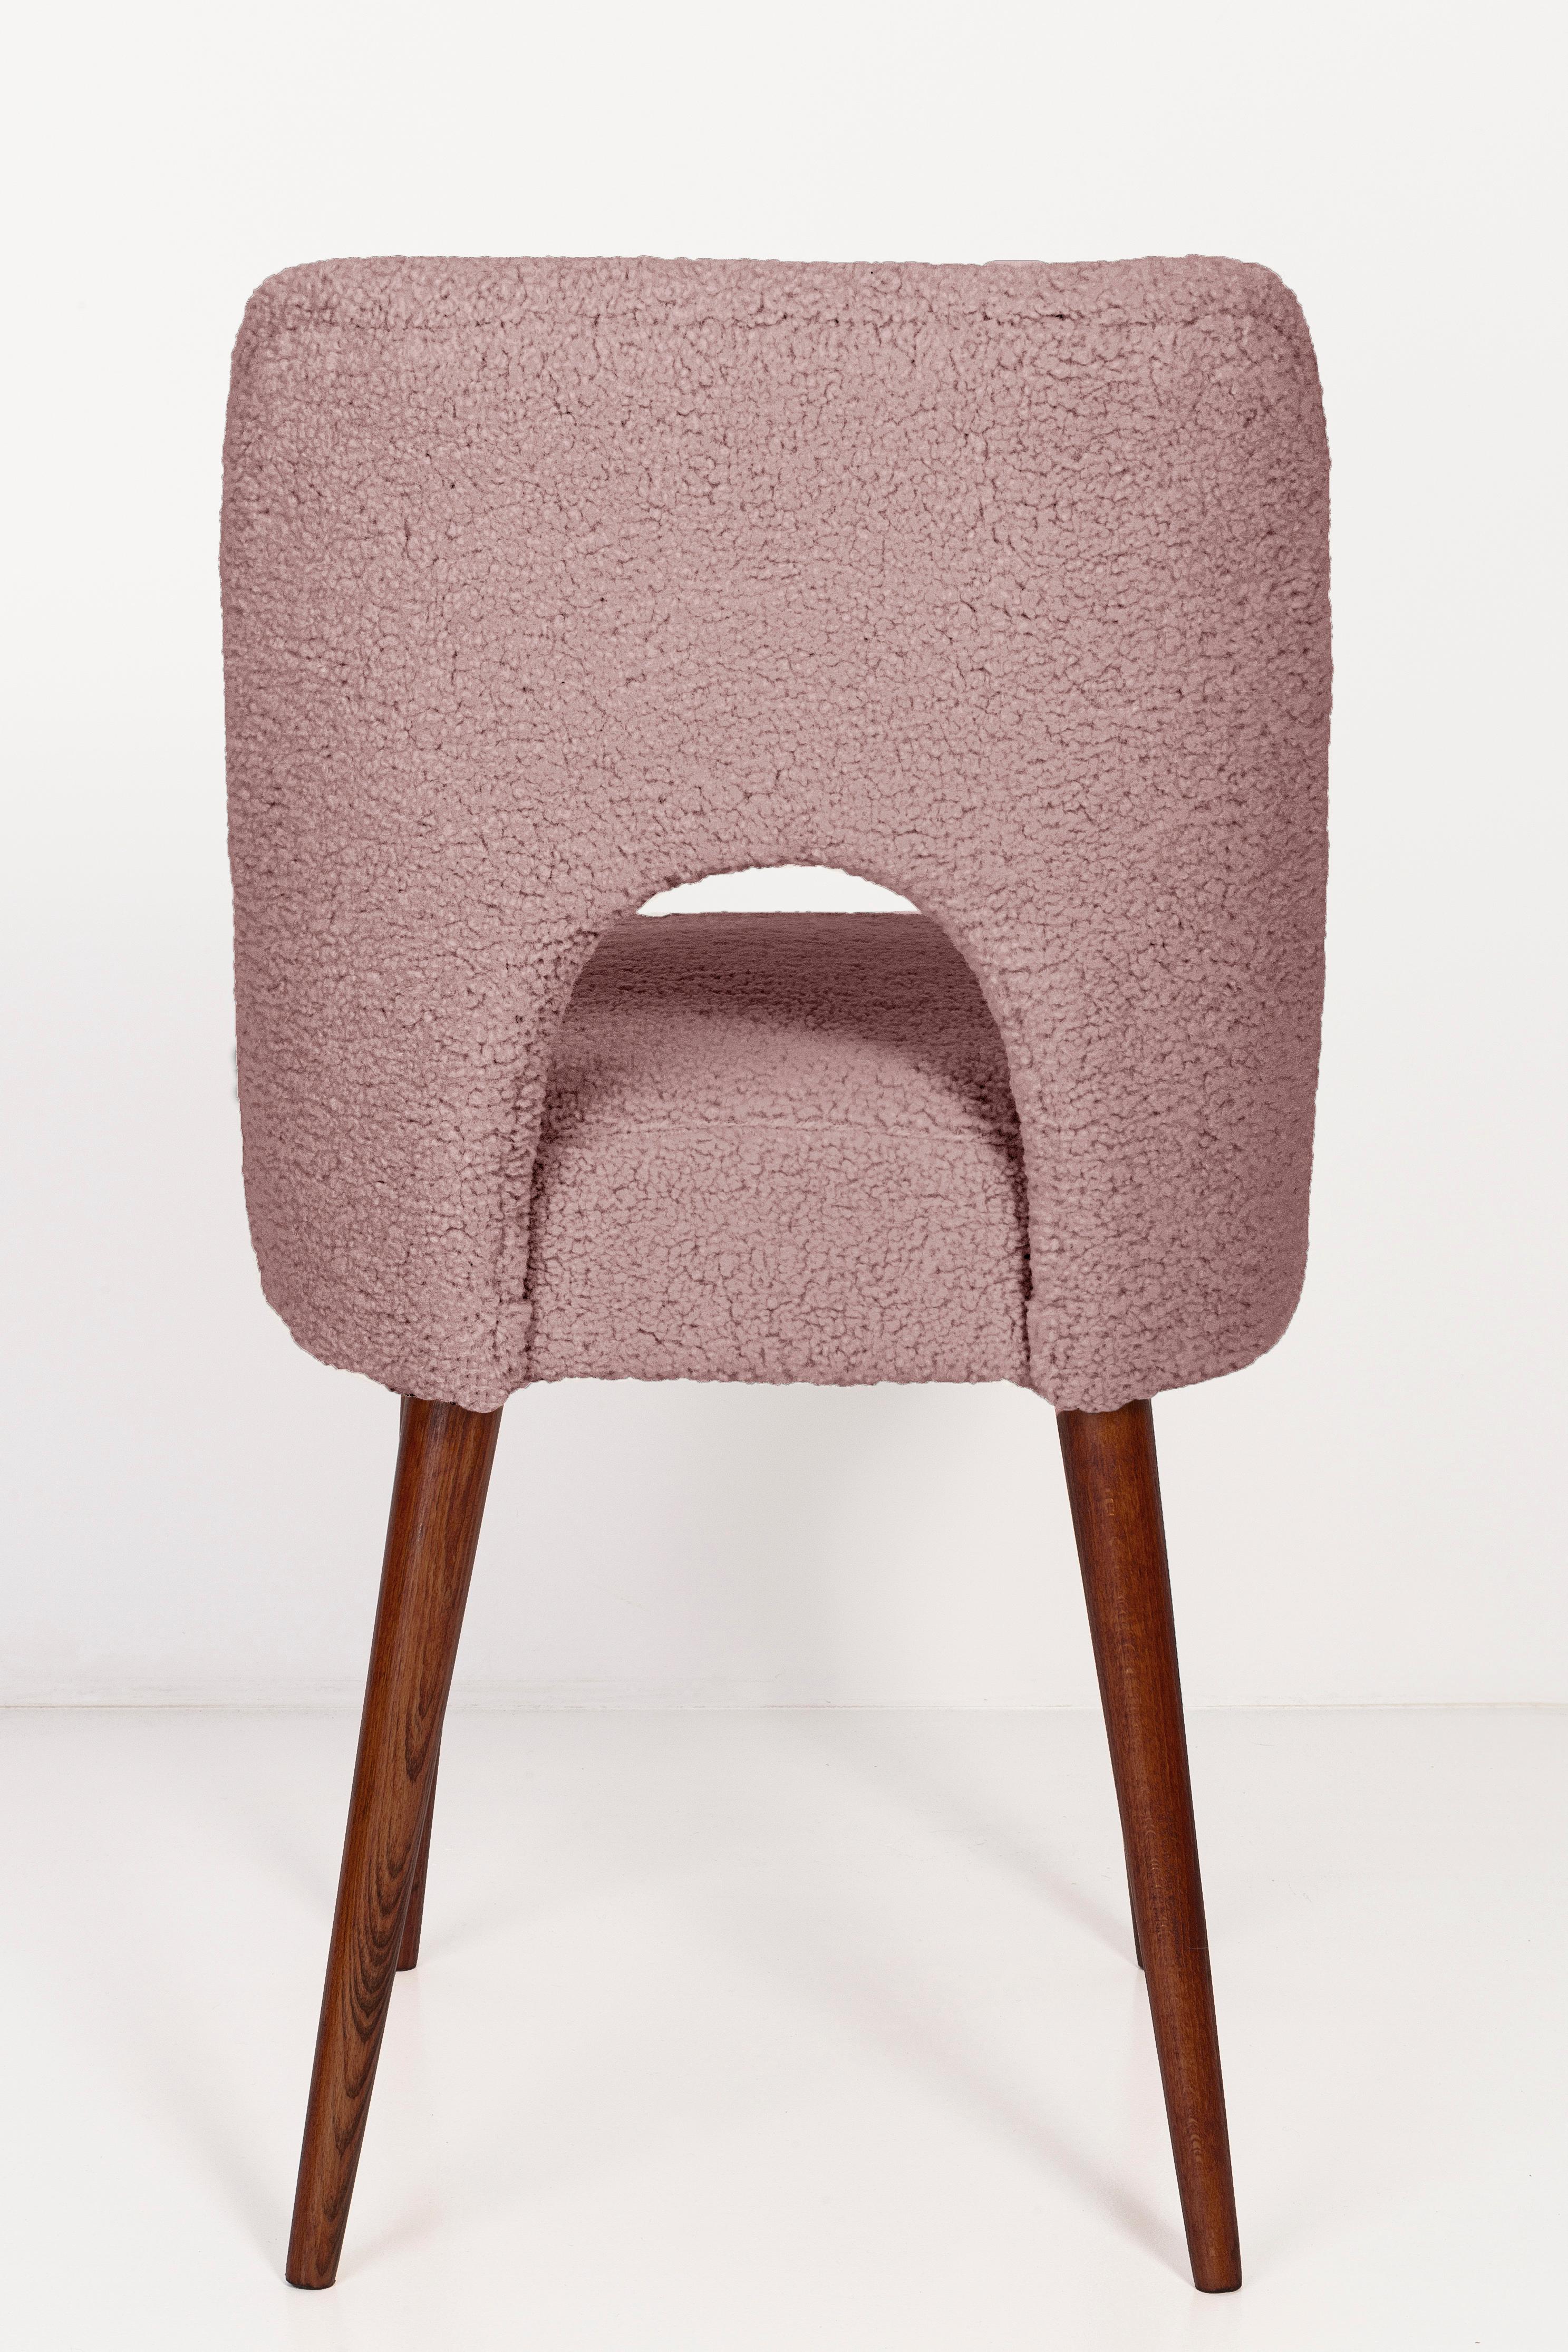 Eight Pink Boucle 'Shell' Chairs, 1960s In Excellent Condition For Sale In 05-080 Hornowek, PL